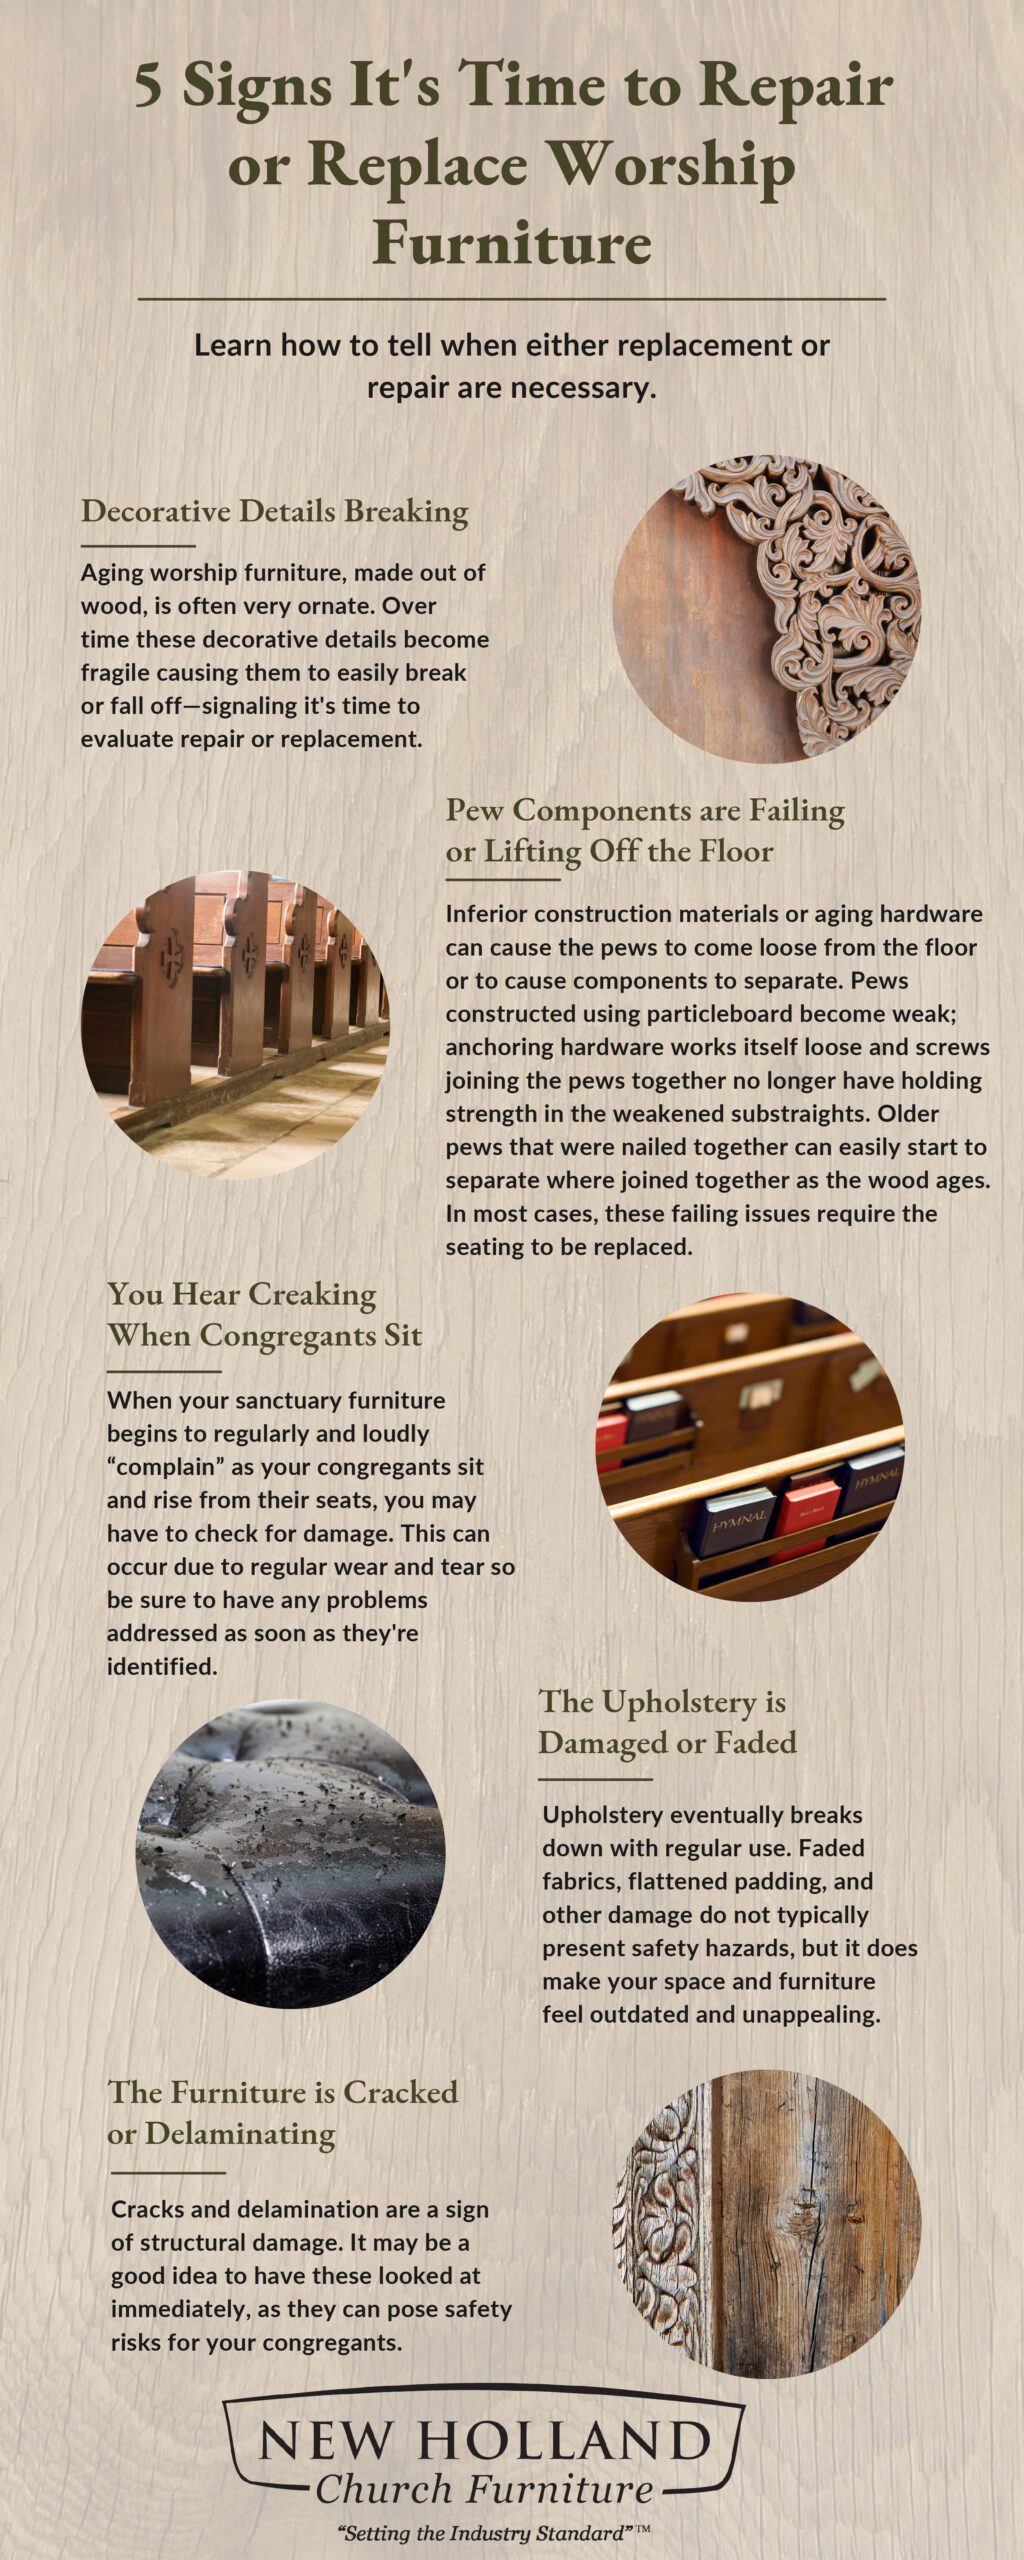 infographic detailing 5 Signs It’s Time to Replace or Restore Your Worship Furniture